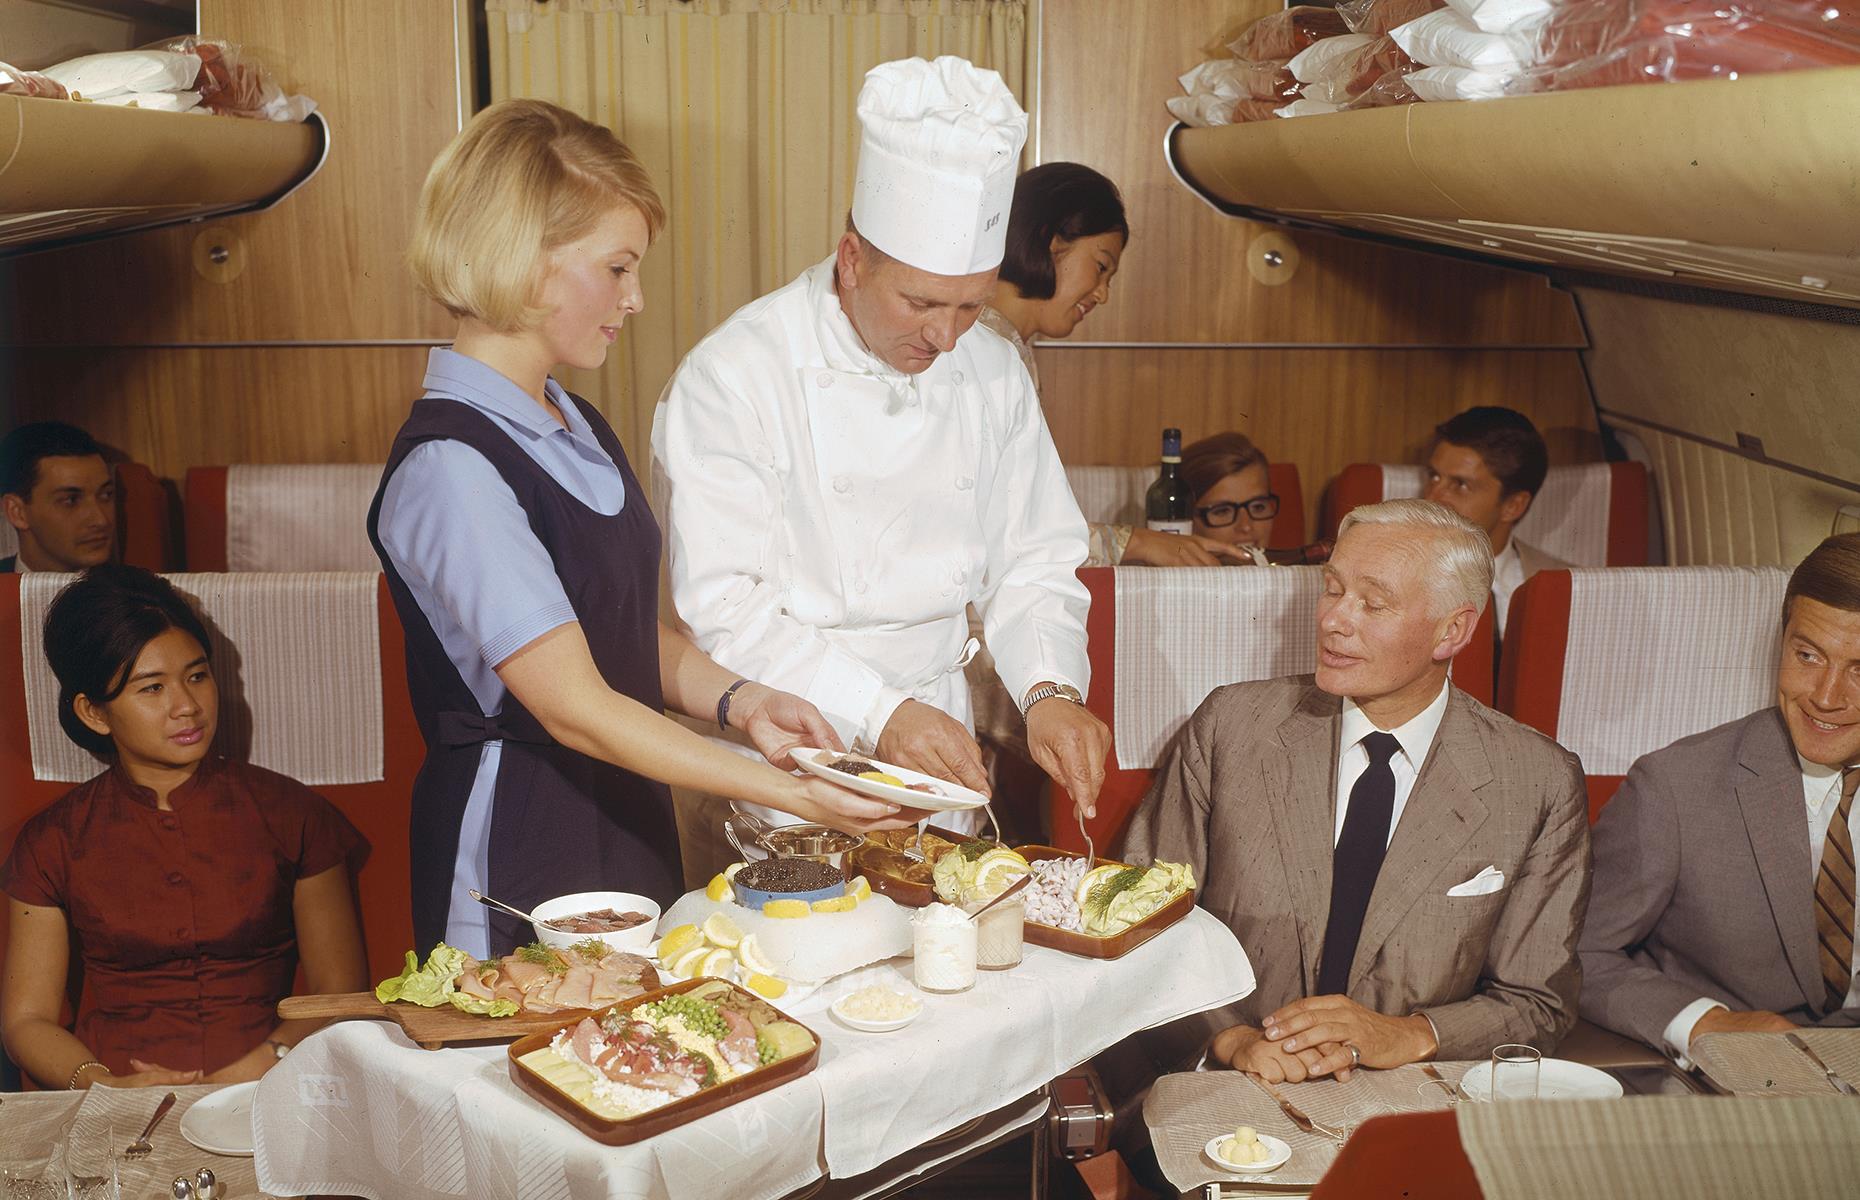 Passengers are receiving similar treatment on this SAS (Scandinavian Airlines) flight in 1969. In this instance, the chef has even come to serve and greet dining first-class passengers. Flying was such an important occasion that it was common for passengers to come aboard in their finest clothes too, with women in dresses and men opting for tailored suits.